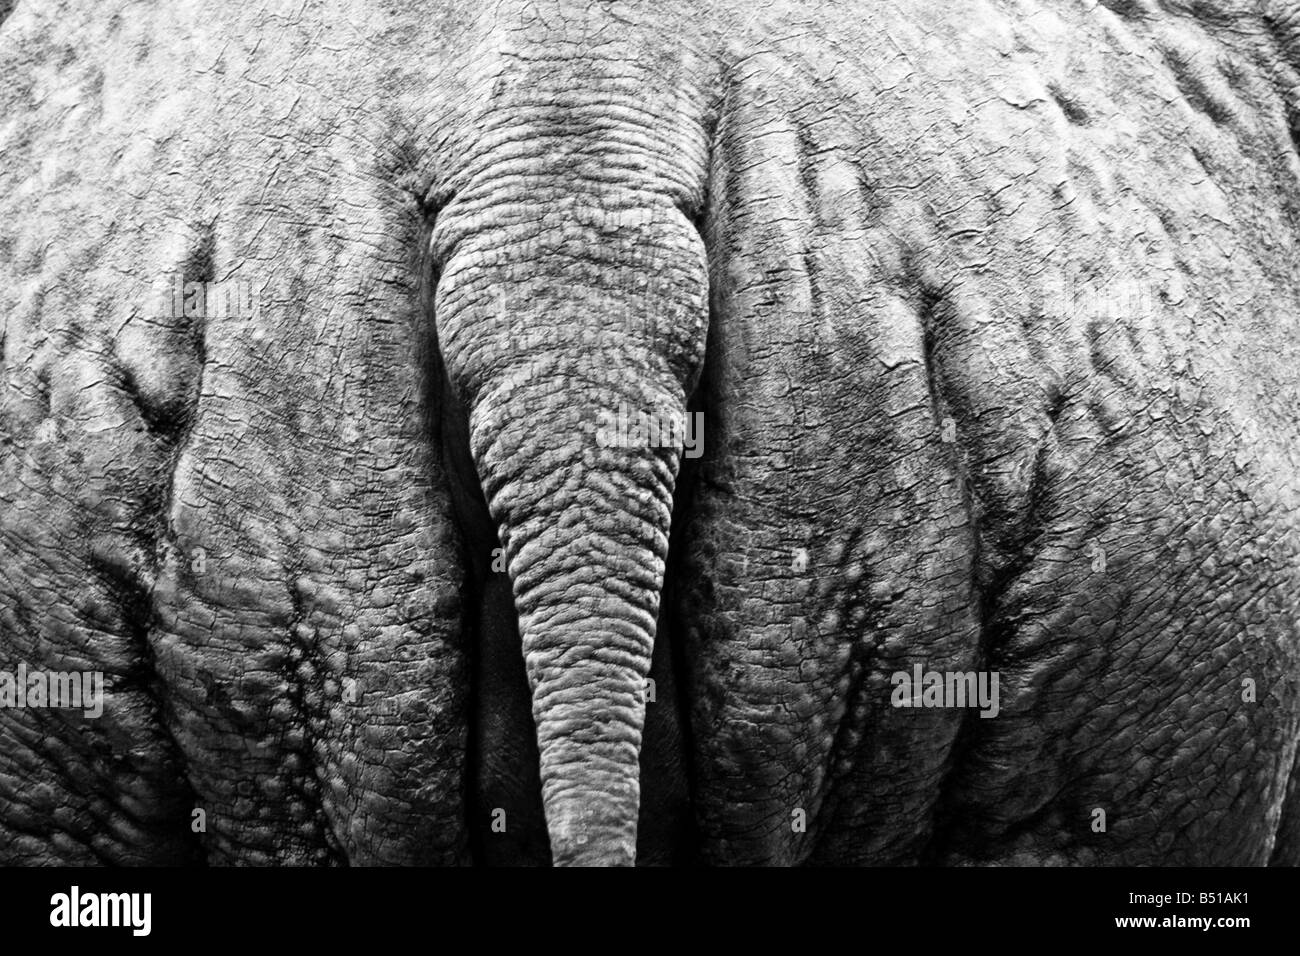 Back and white photography of showing the bottom / read-end of a rhino. Stock Photo